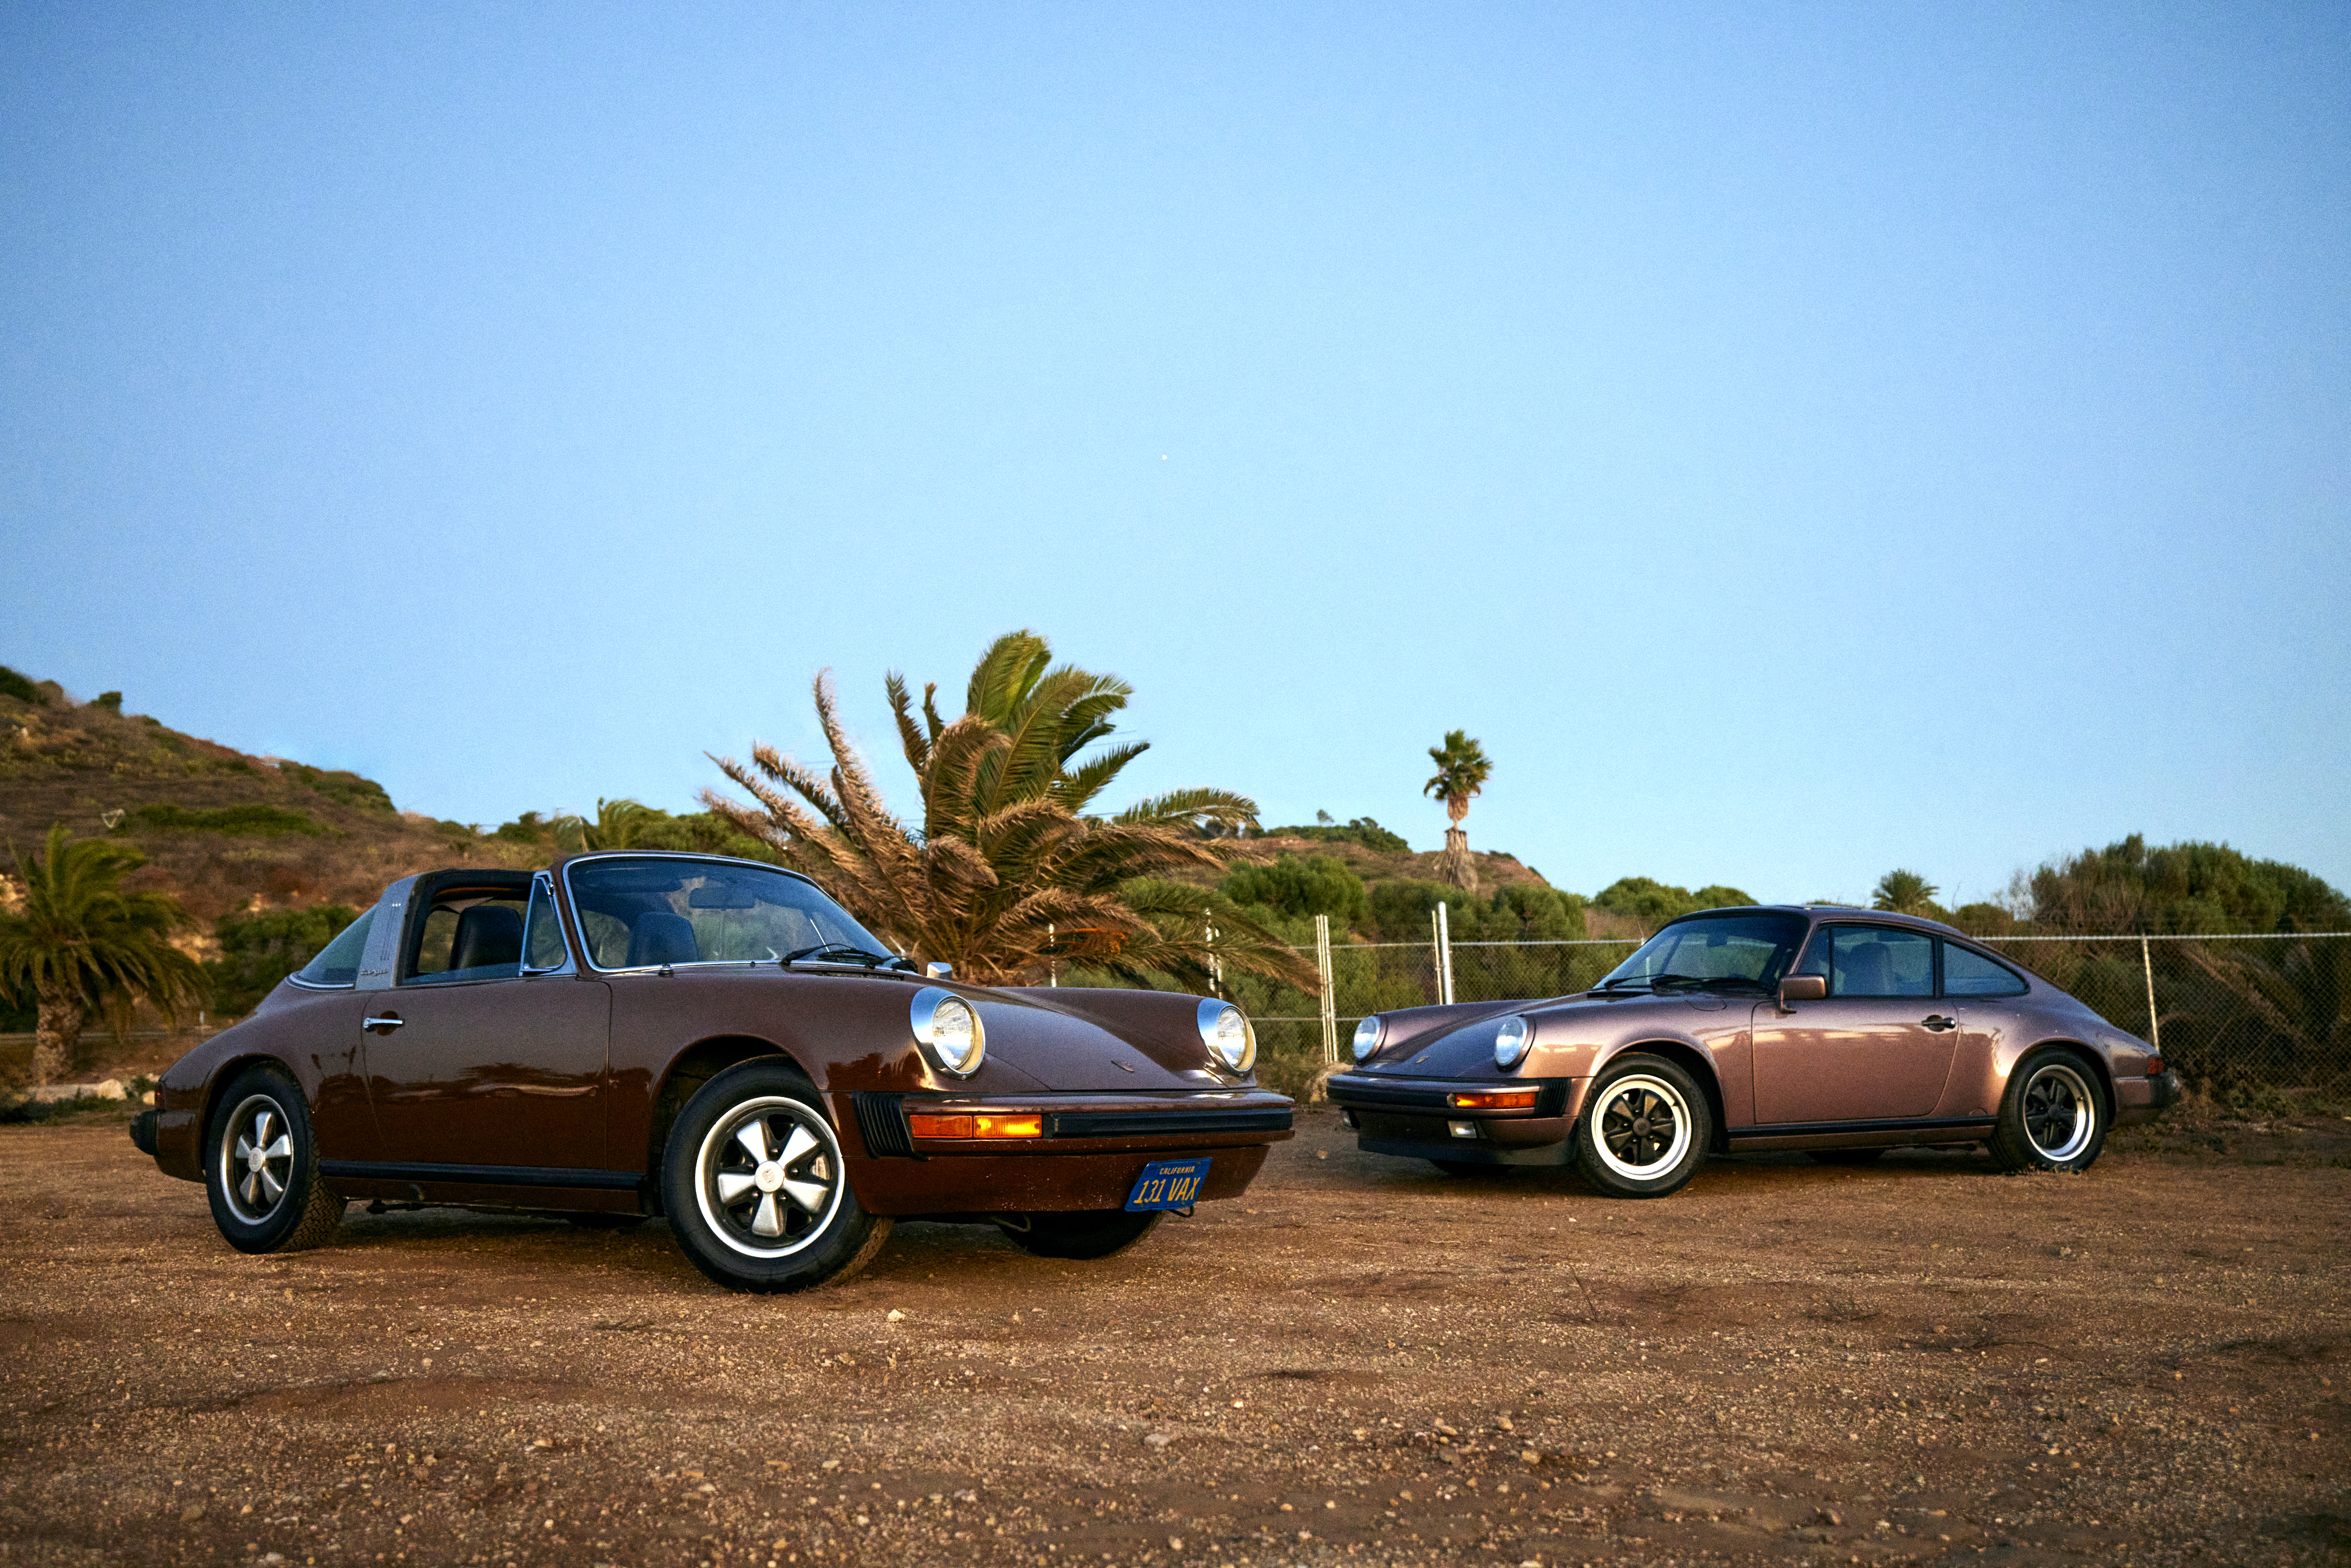 Two Porsche 911 sportscars parked side by side at dusk